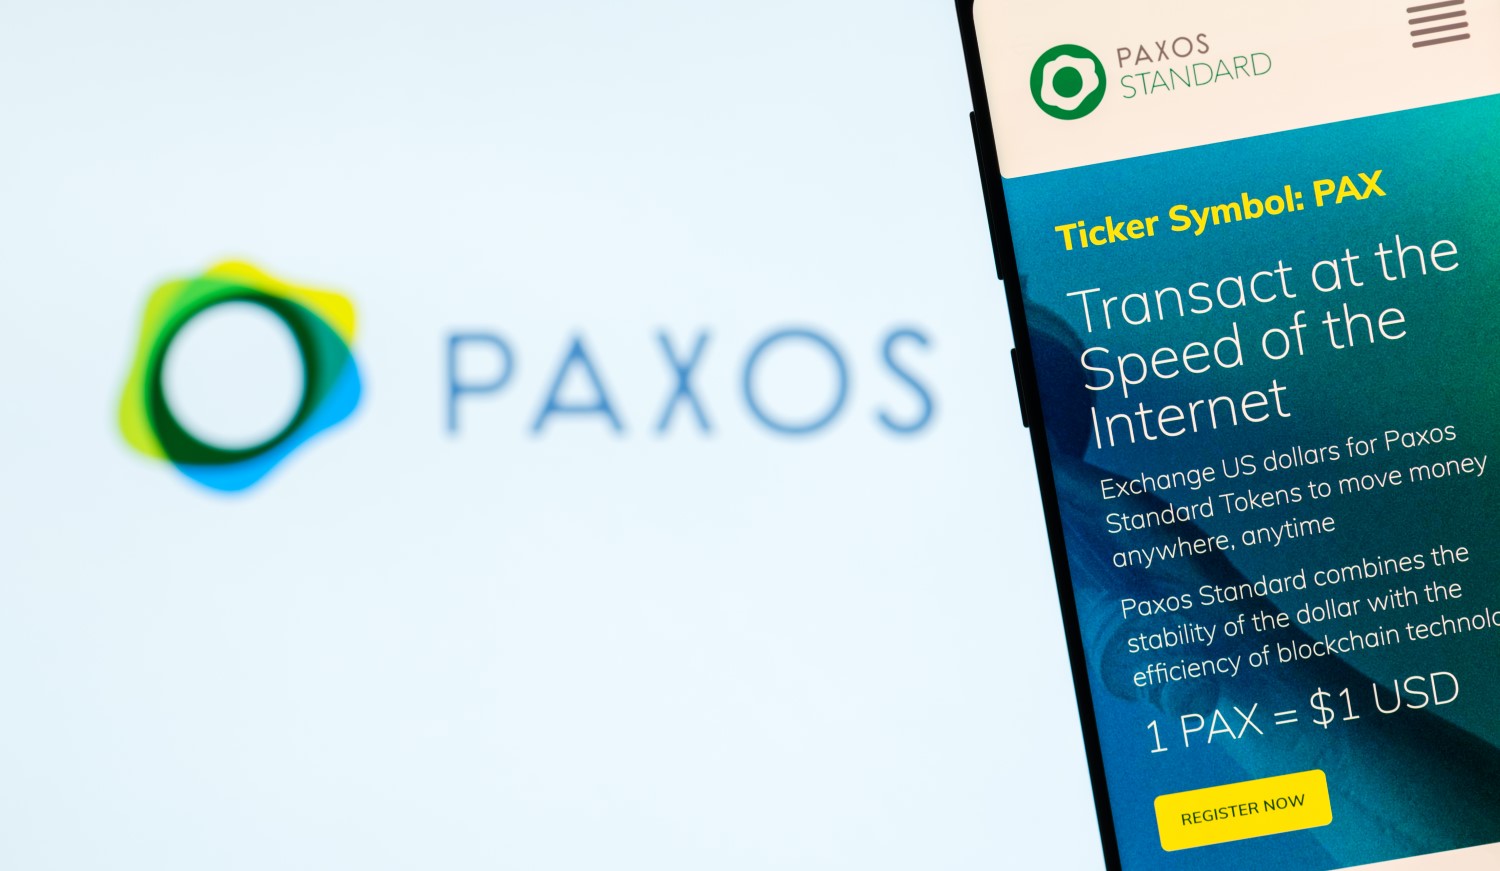 ‘Up To 100 Million’ Paxos Stablecoins To Be Issued On Ontology Blockchain